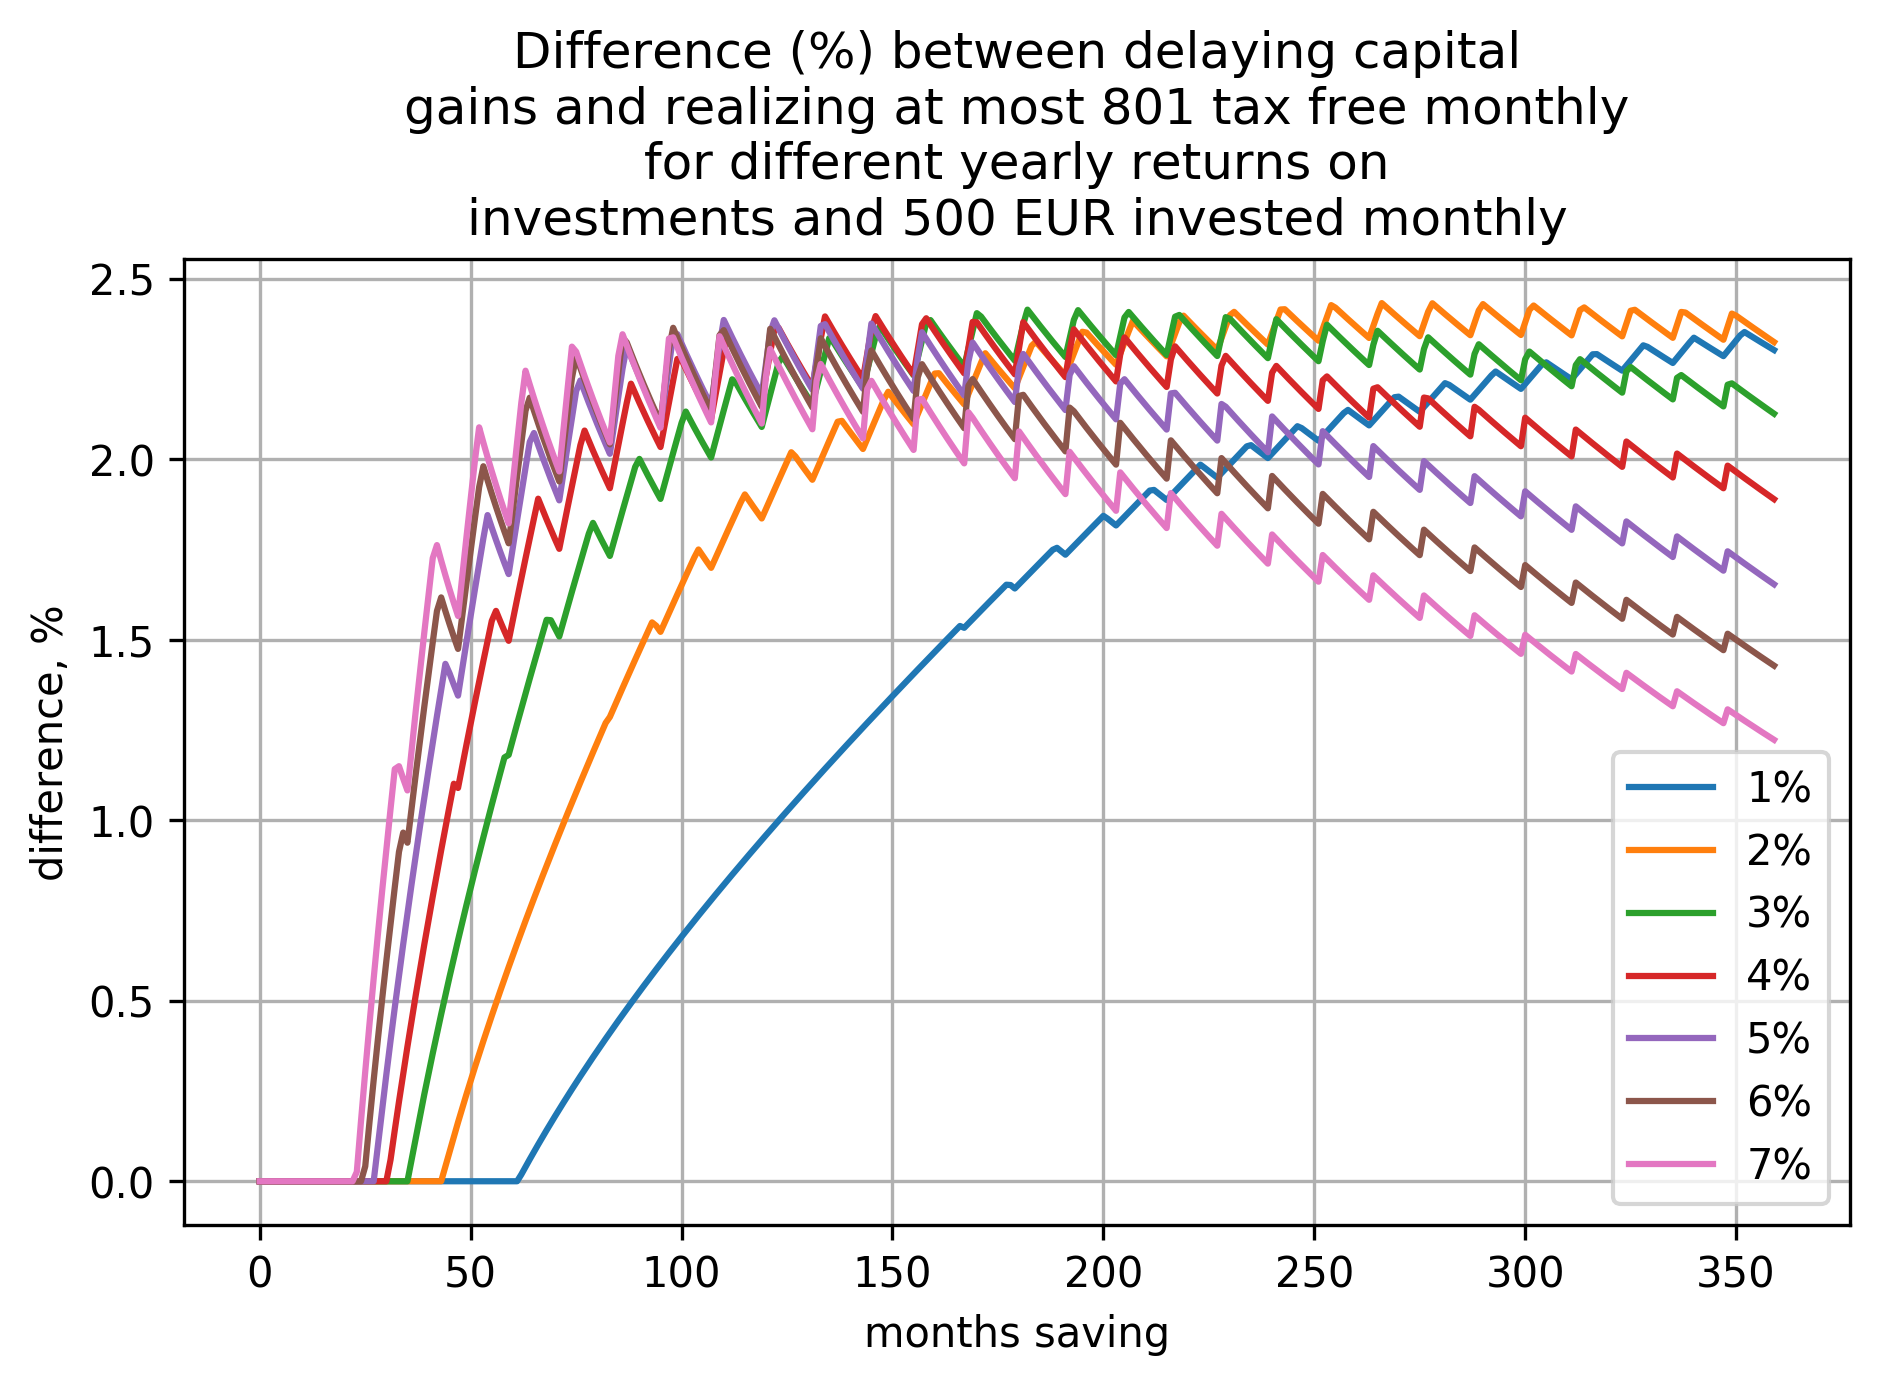 a plot showing how difference (in percents) between the two cases (delaying capital gains and
realizing at most 801€ tax free yearly) depends on time saving and yearly return on
investment when investing 500€ per month